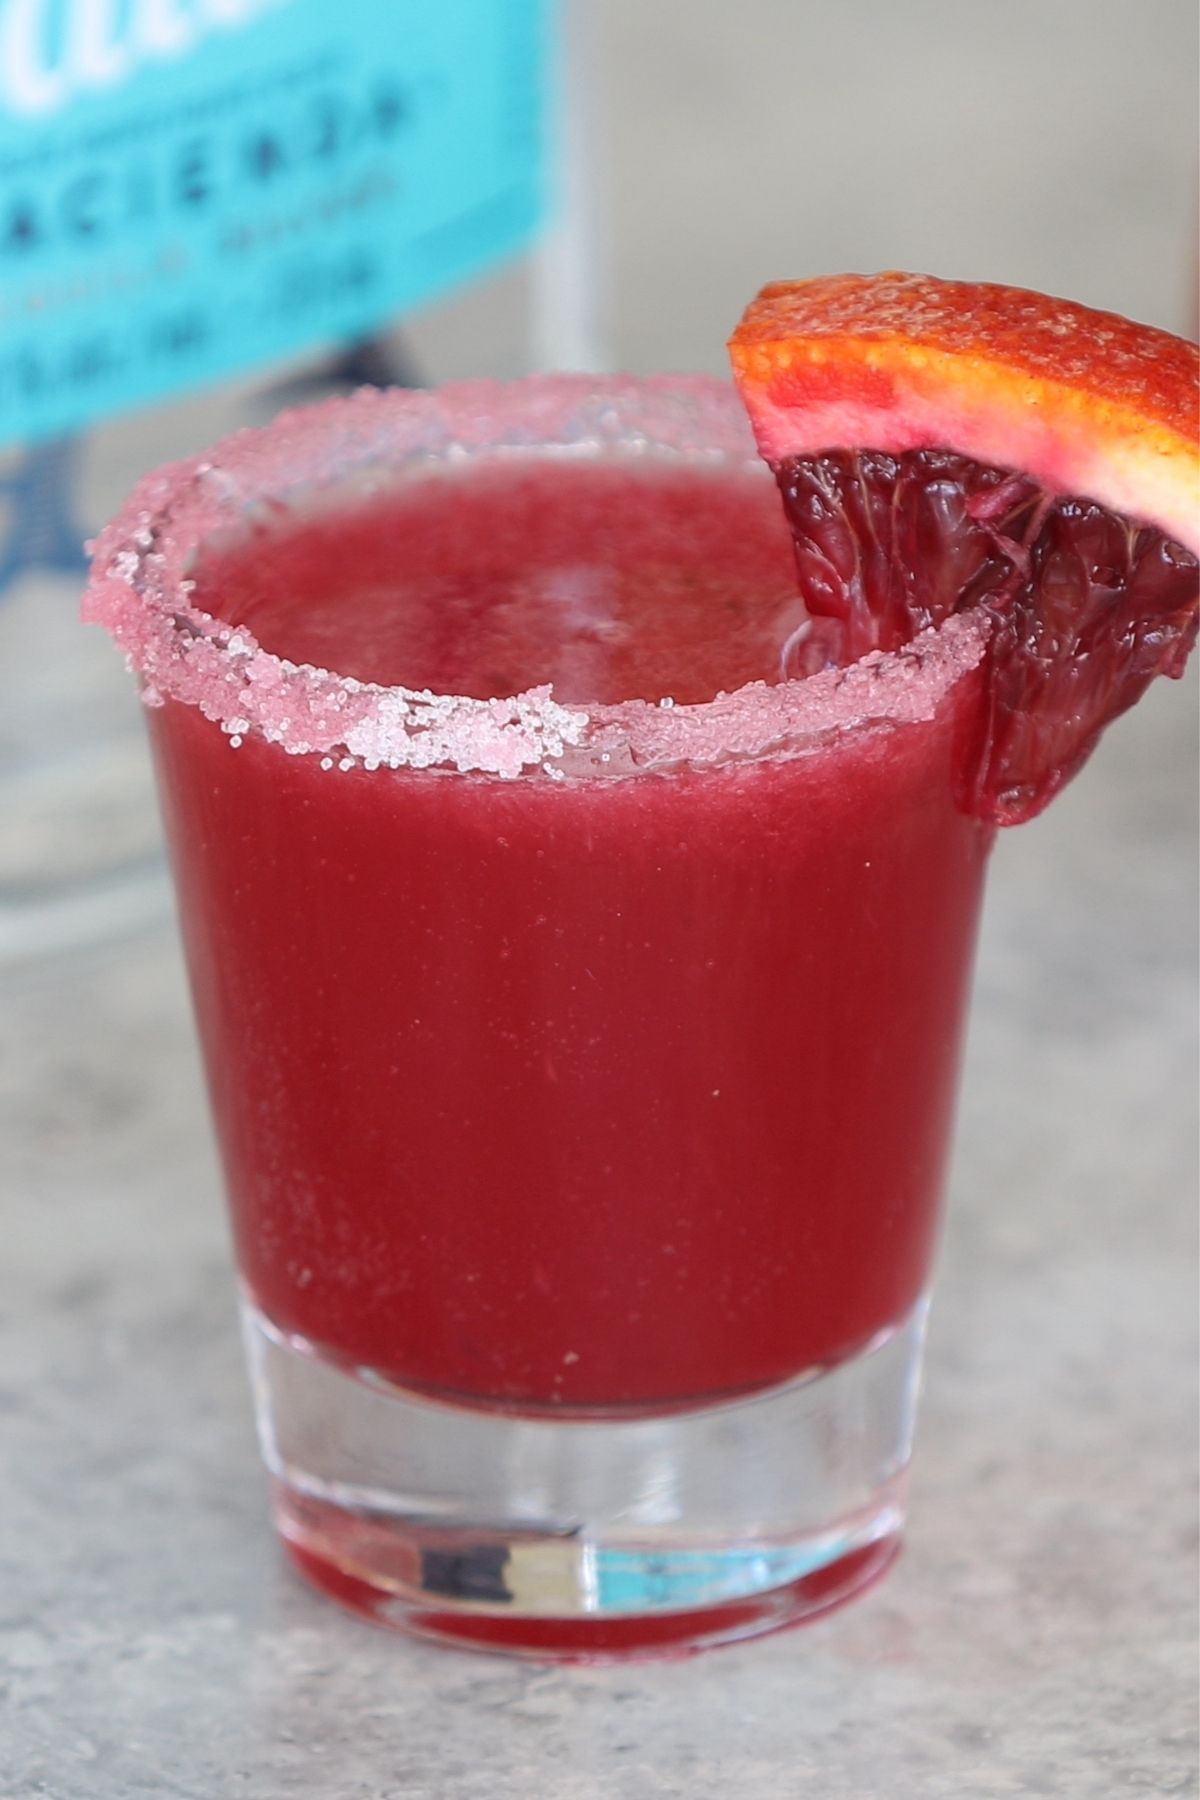 Often served at Mexican restaurants, Blood Orange Margarita is a tasty combo of citrus juice, tequila and orange liqueur. This variation uses the fresh juice of blood oranges for a refreshing and fruity taste.